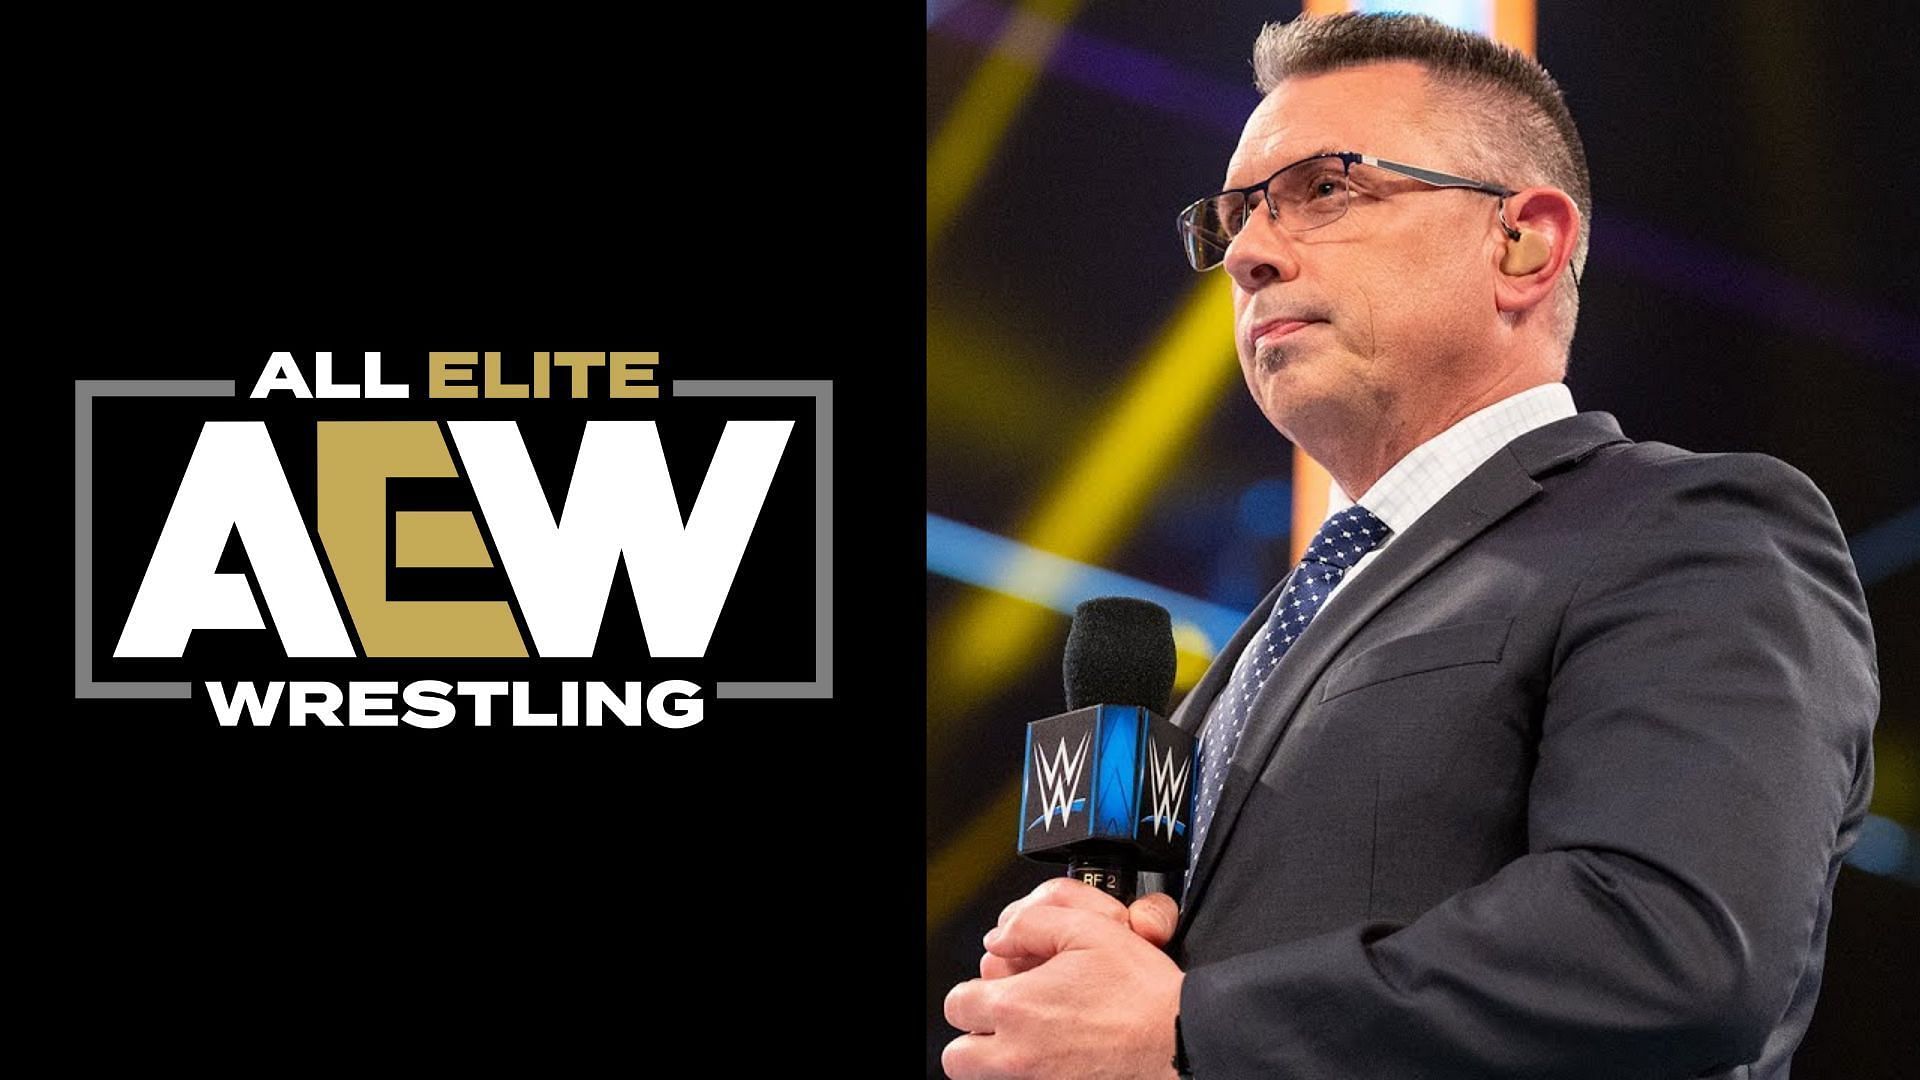 AEW name talked to Michael Cole about doing commentary for WWE